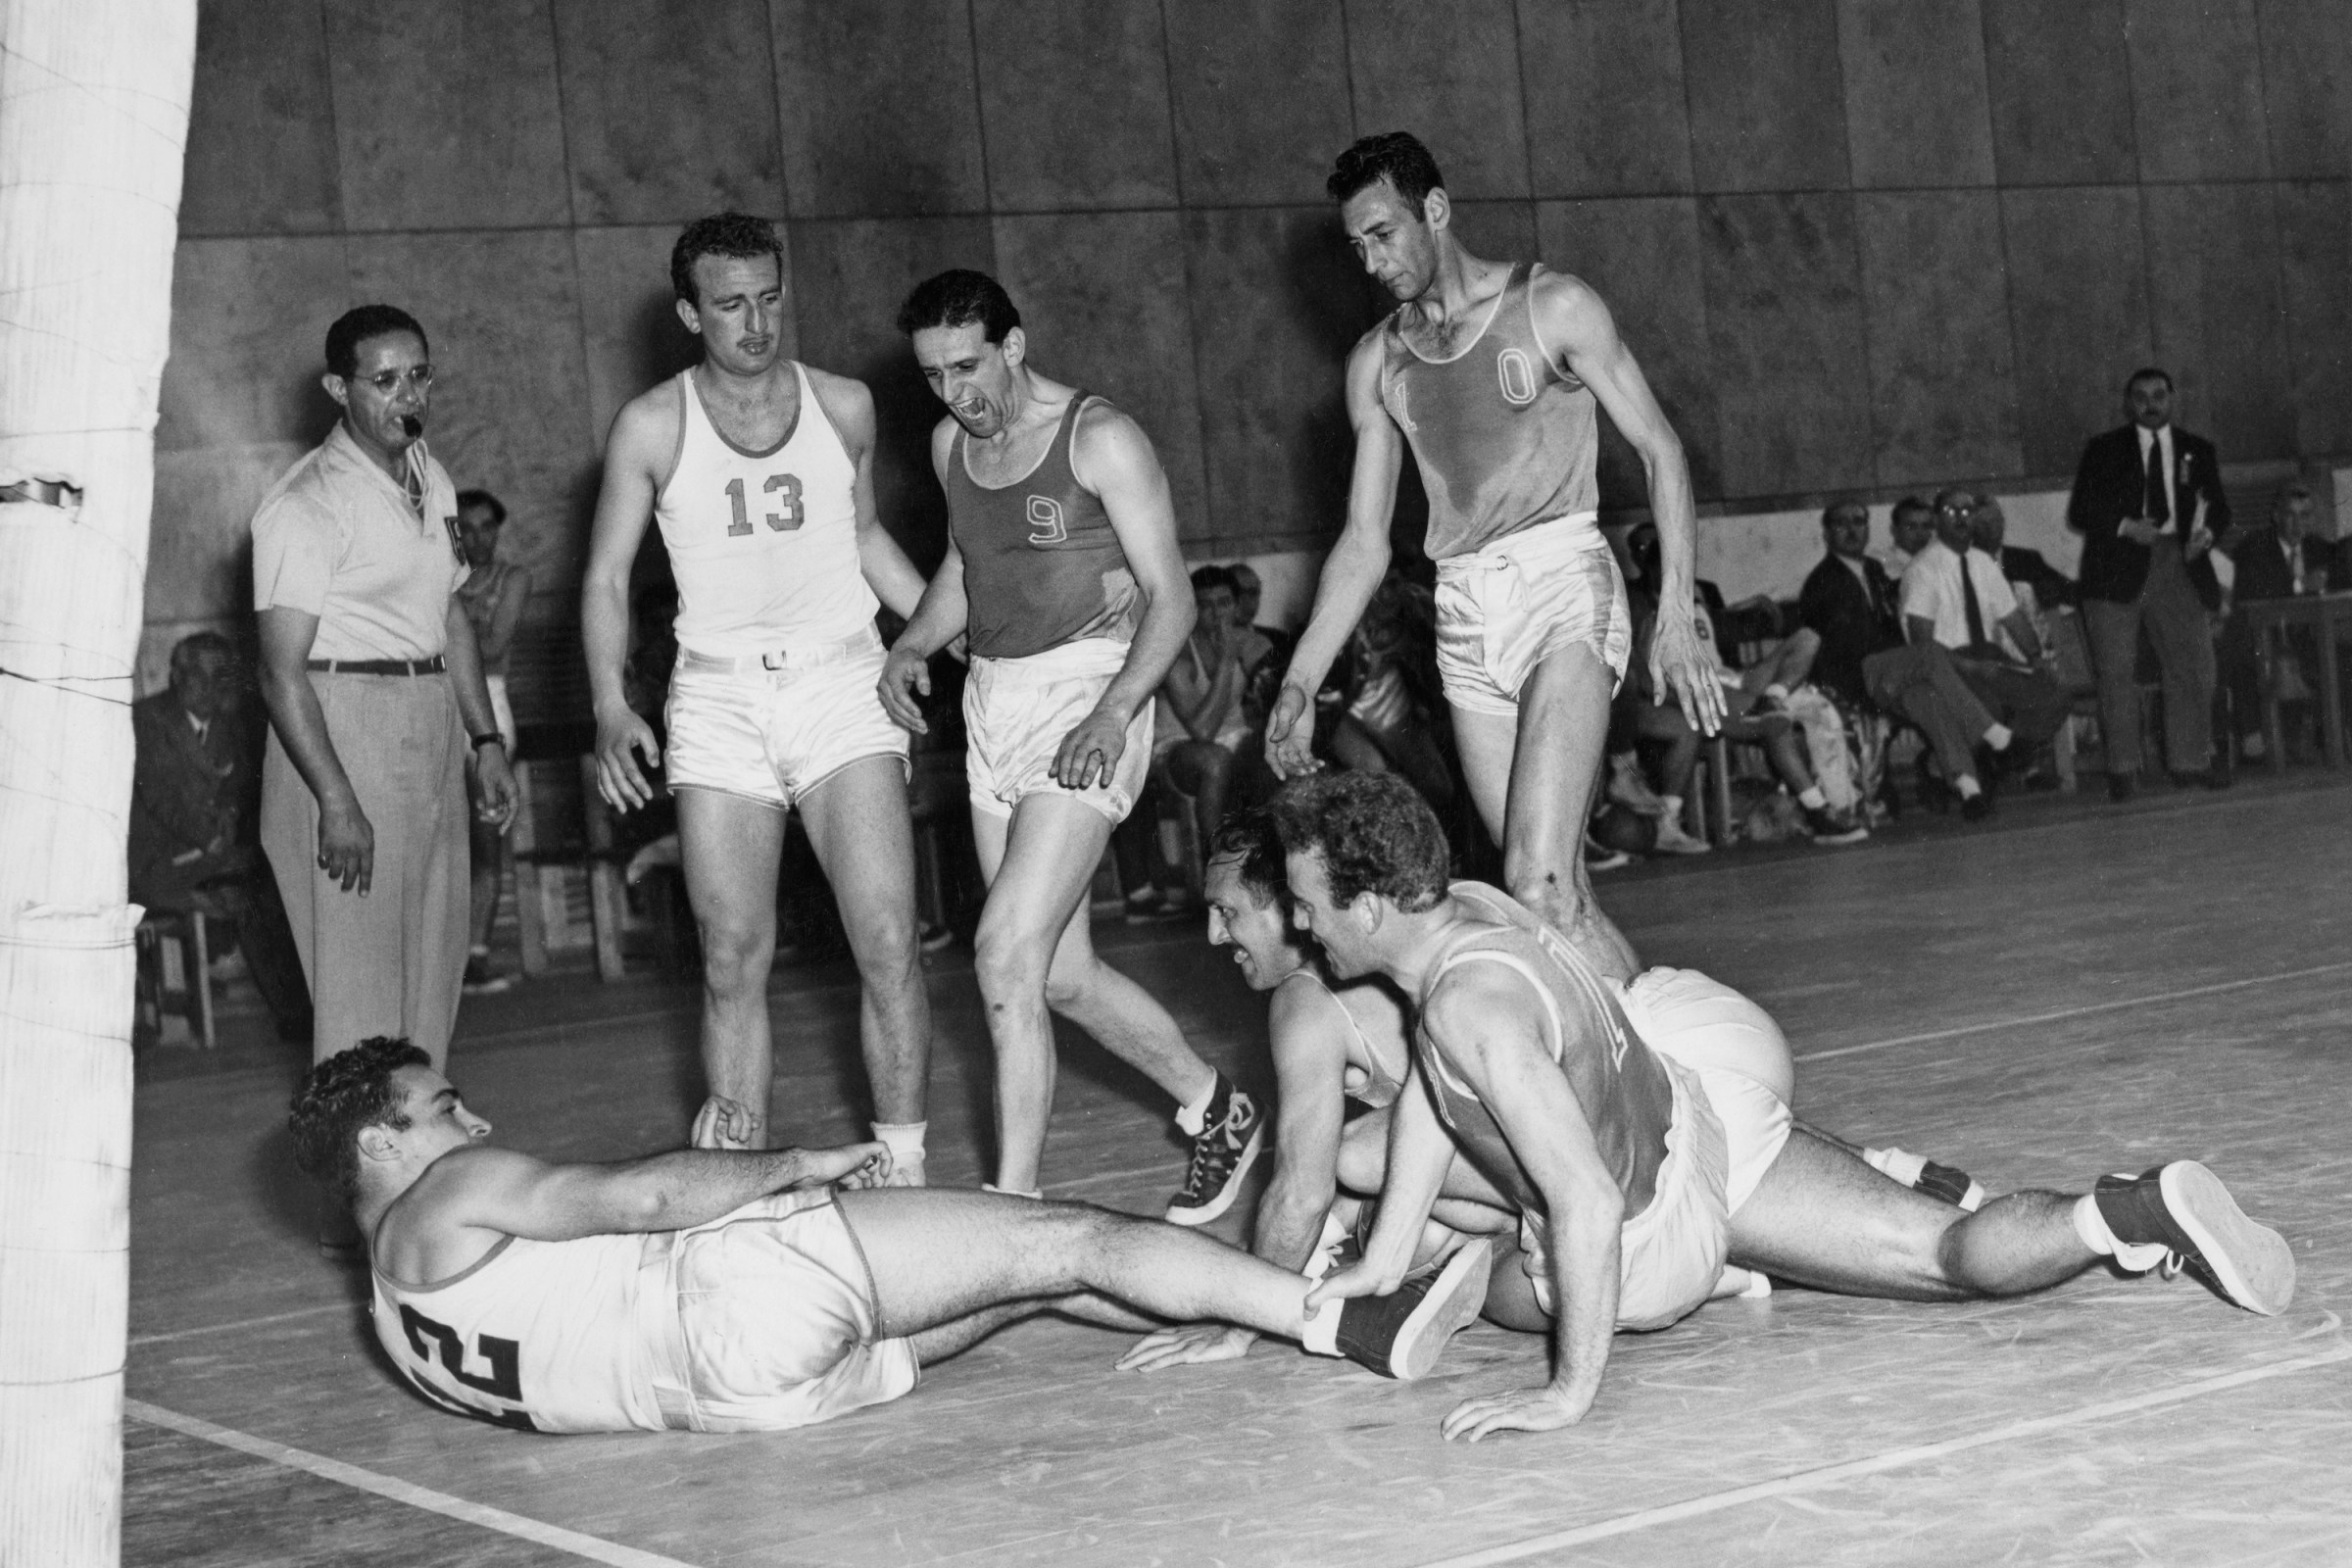 Argentine and Uruguayan players compete, or mostly kind of lay around, in basketball at the 1952 Summer Olympics.